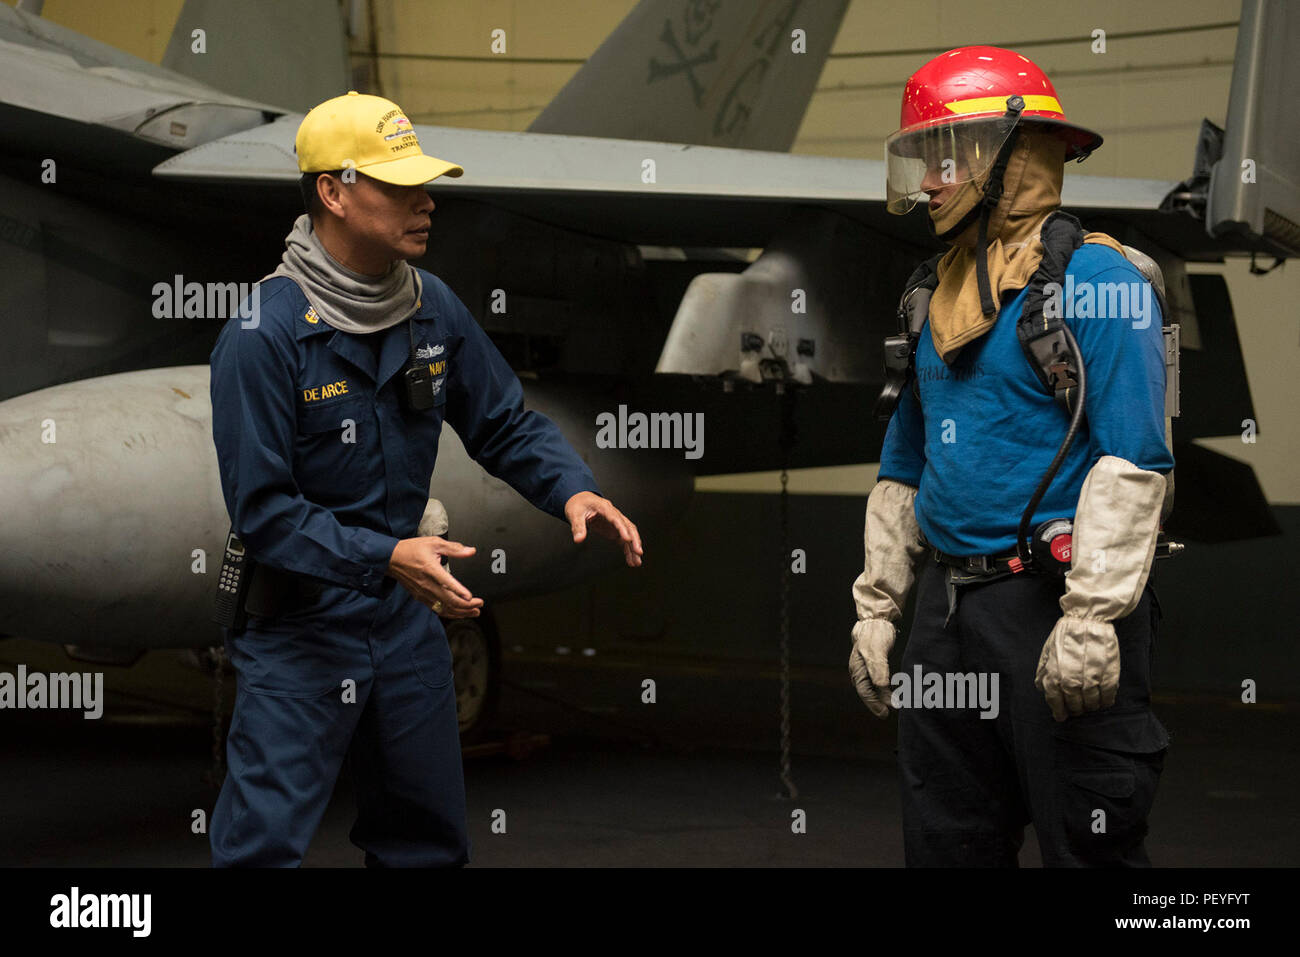 160215-N-IG466-037 ARABIAN GULF (Feb. 15, 2016) Master Chief Machinery Repairman Zoilo De Arce, left, trains Aviation Boatswain's Mate (Handling) Airman Abraham Puente how to fight a simulated fire during a general quarters drill in the hangar bay of aircraft carrier USS Harry S. Truman (CVN 75). GQ drills prepare Sailors to be at the highest state of readiness in the event of an emergency. Harry S. Truman Carrier Strike Group is deployed in support of Operation Inherent Resolve, maritime security operations, and theater security cooperation efforts in the U.S. 5th Fleet area of operations. (U Stock Photo